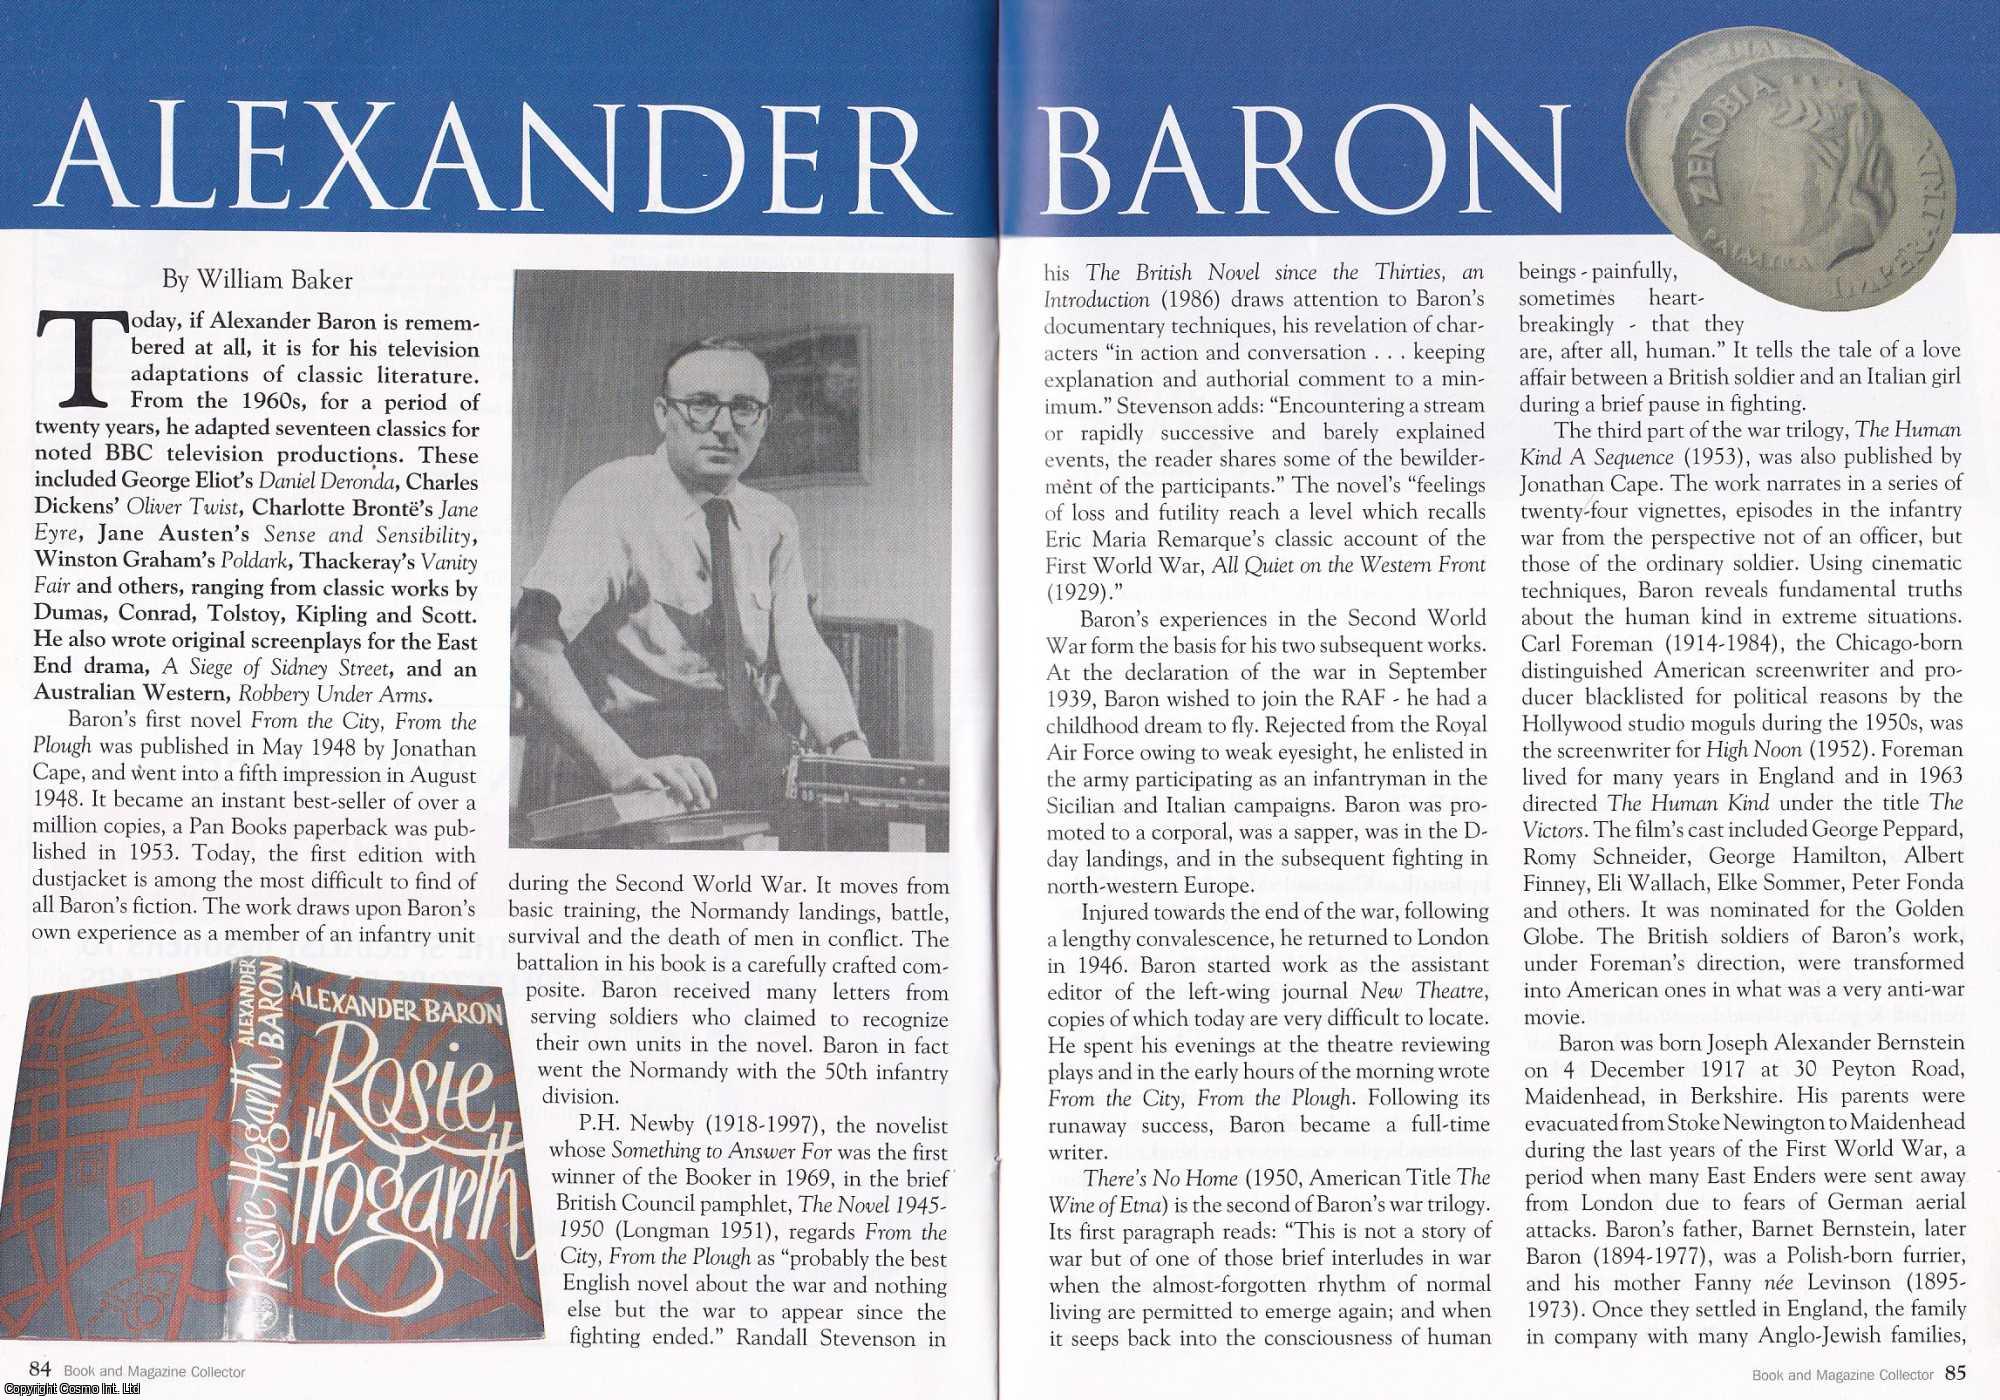 William Baker - Alexander Baron. This is an original article separated from an issue of The Book & Magazine Collector publication.